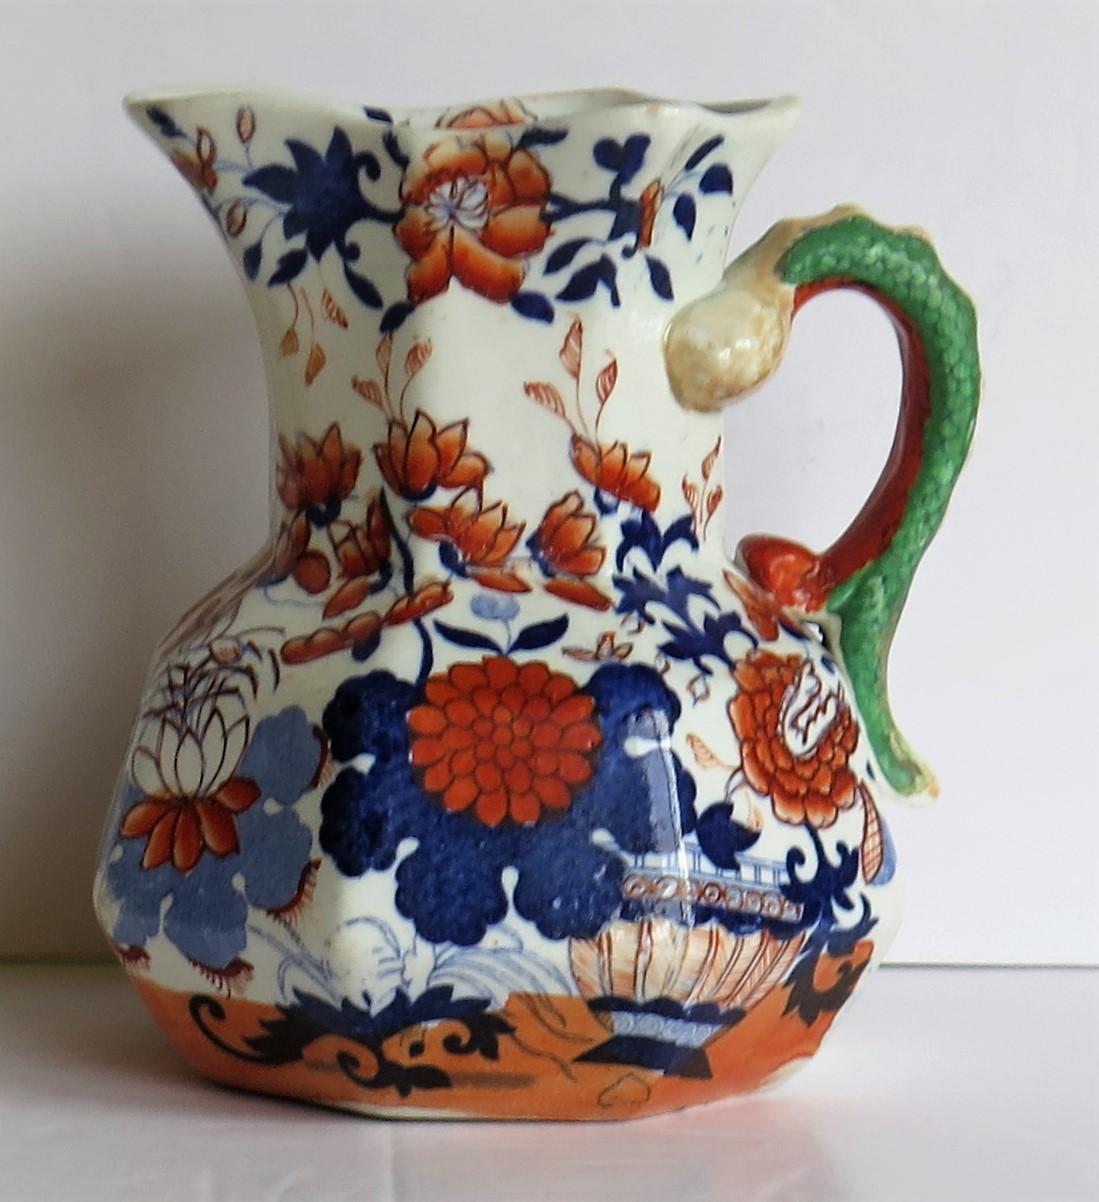 This is a very good, Mason's Ironstone Hydra jug or pitcher in the basket Japan pattern, made in the English, William 1Vth or early Victorian period, circa 1830-1848.

The jug has an octagonal shape with a notched snake handle and is decorated in